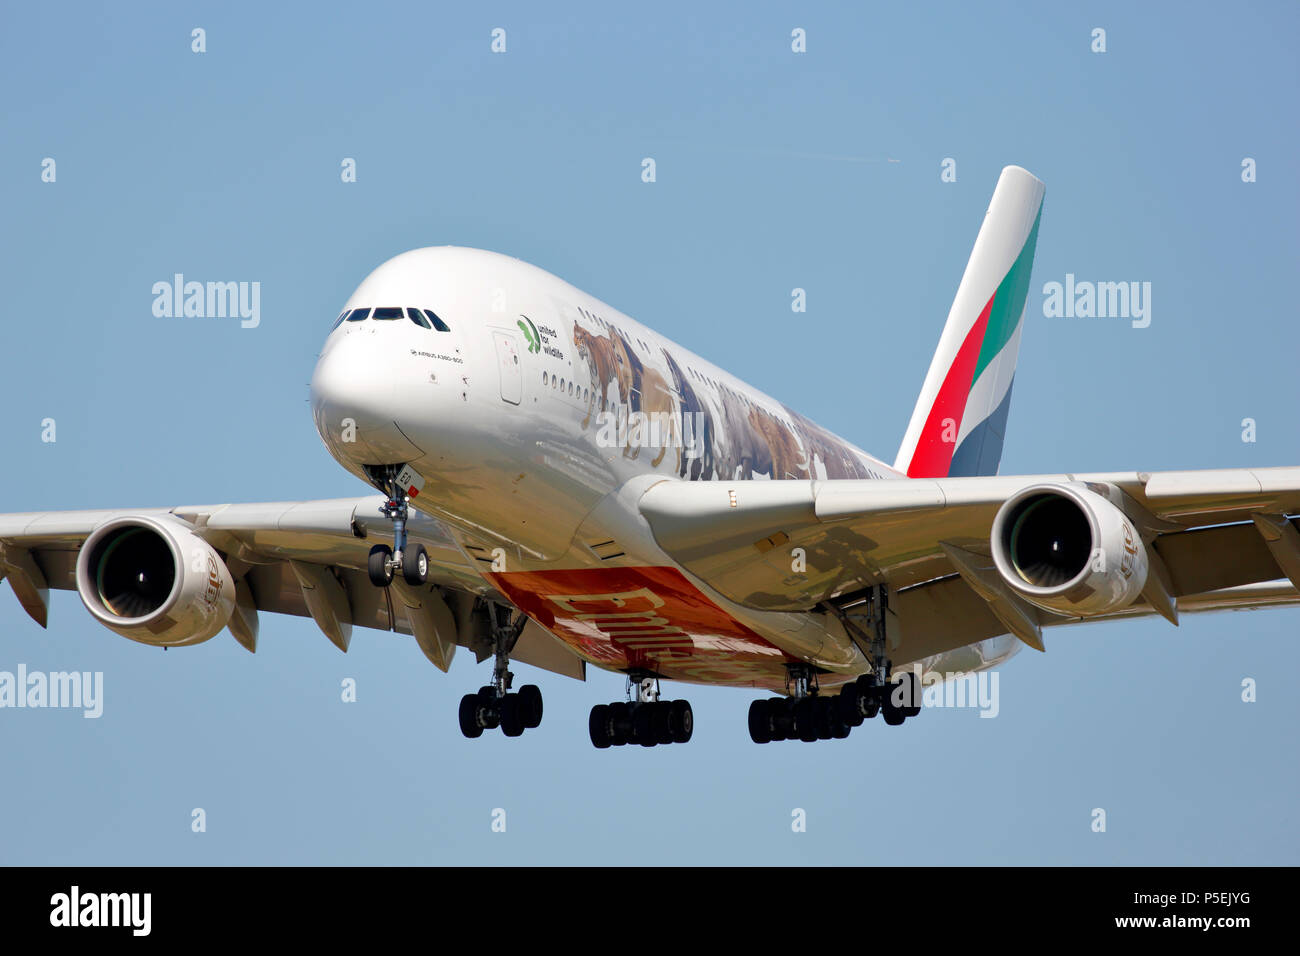 A6-EEQ Emirates Airways Airbus A380-800 on approach to London Heathrow 27L runway after a long haul flight Stock Photo